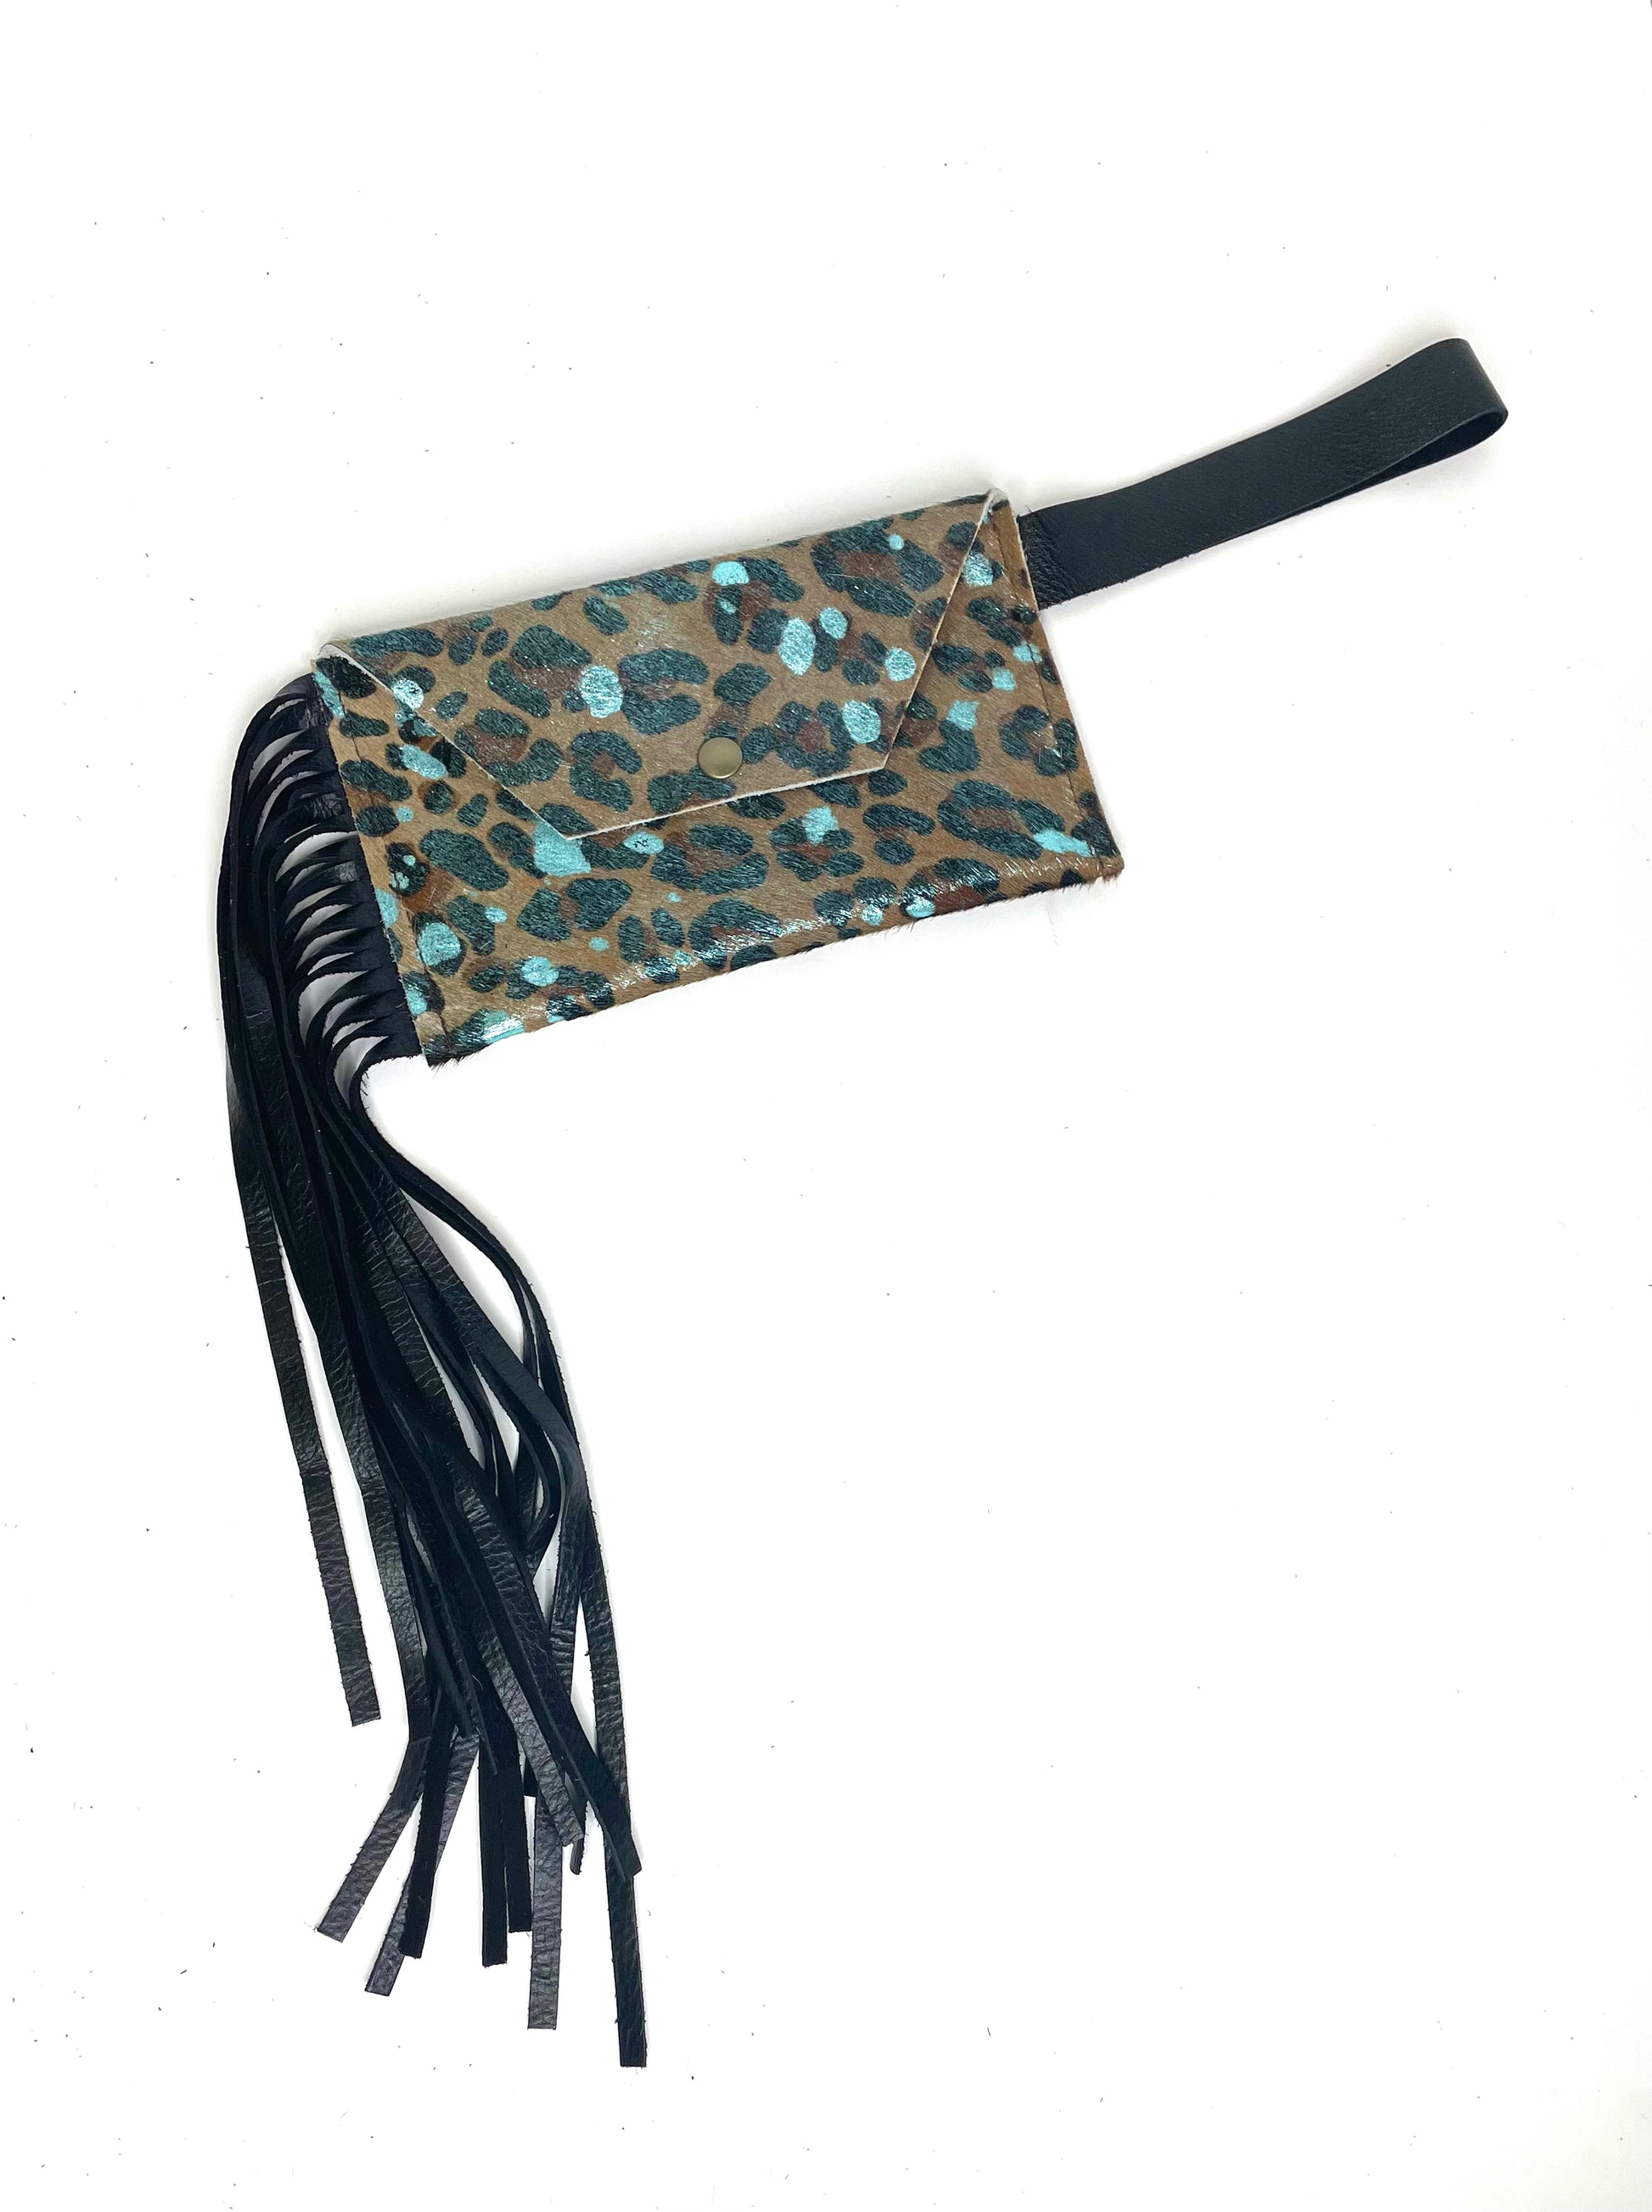 Petite Snap Wristlet with fringe in leopard with blue acid wash ( no patch) - Patches Of Upcycling